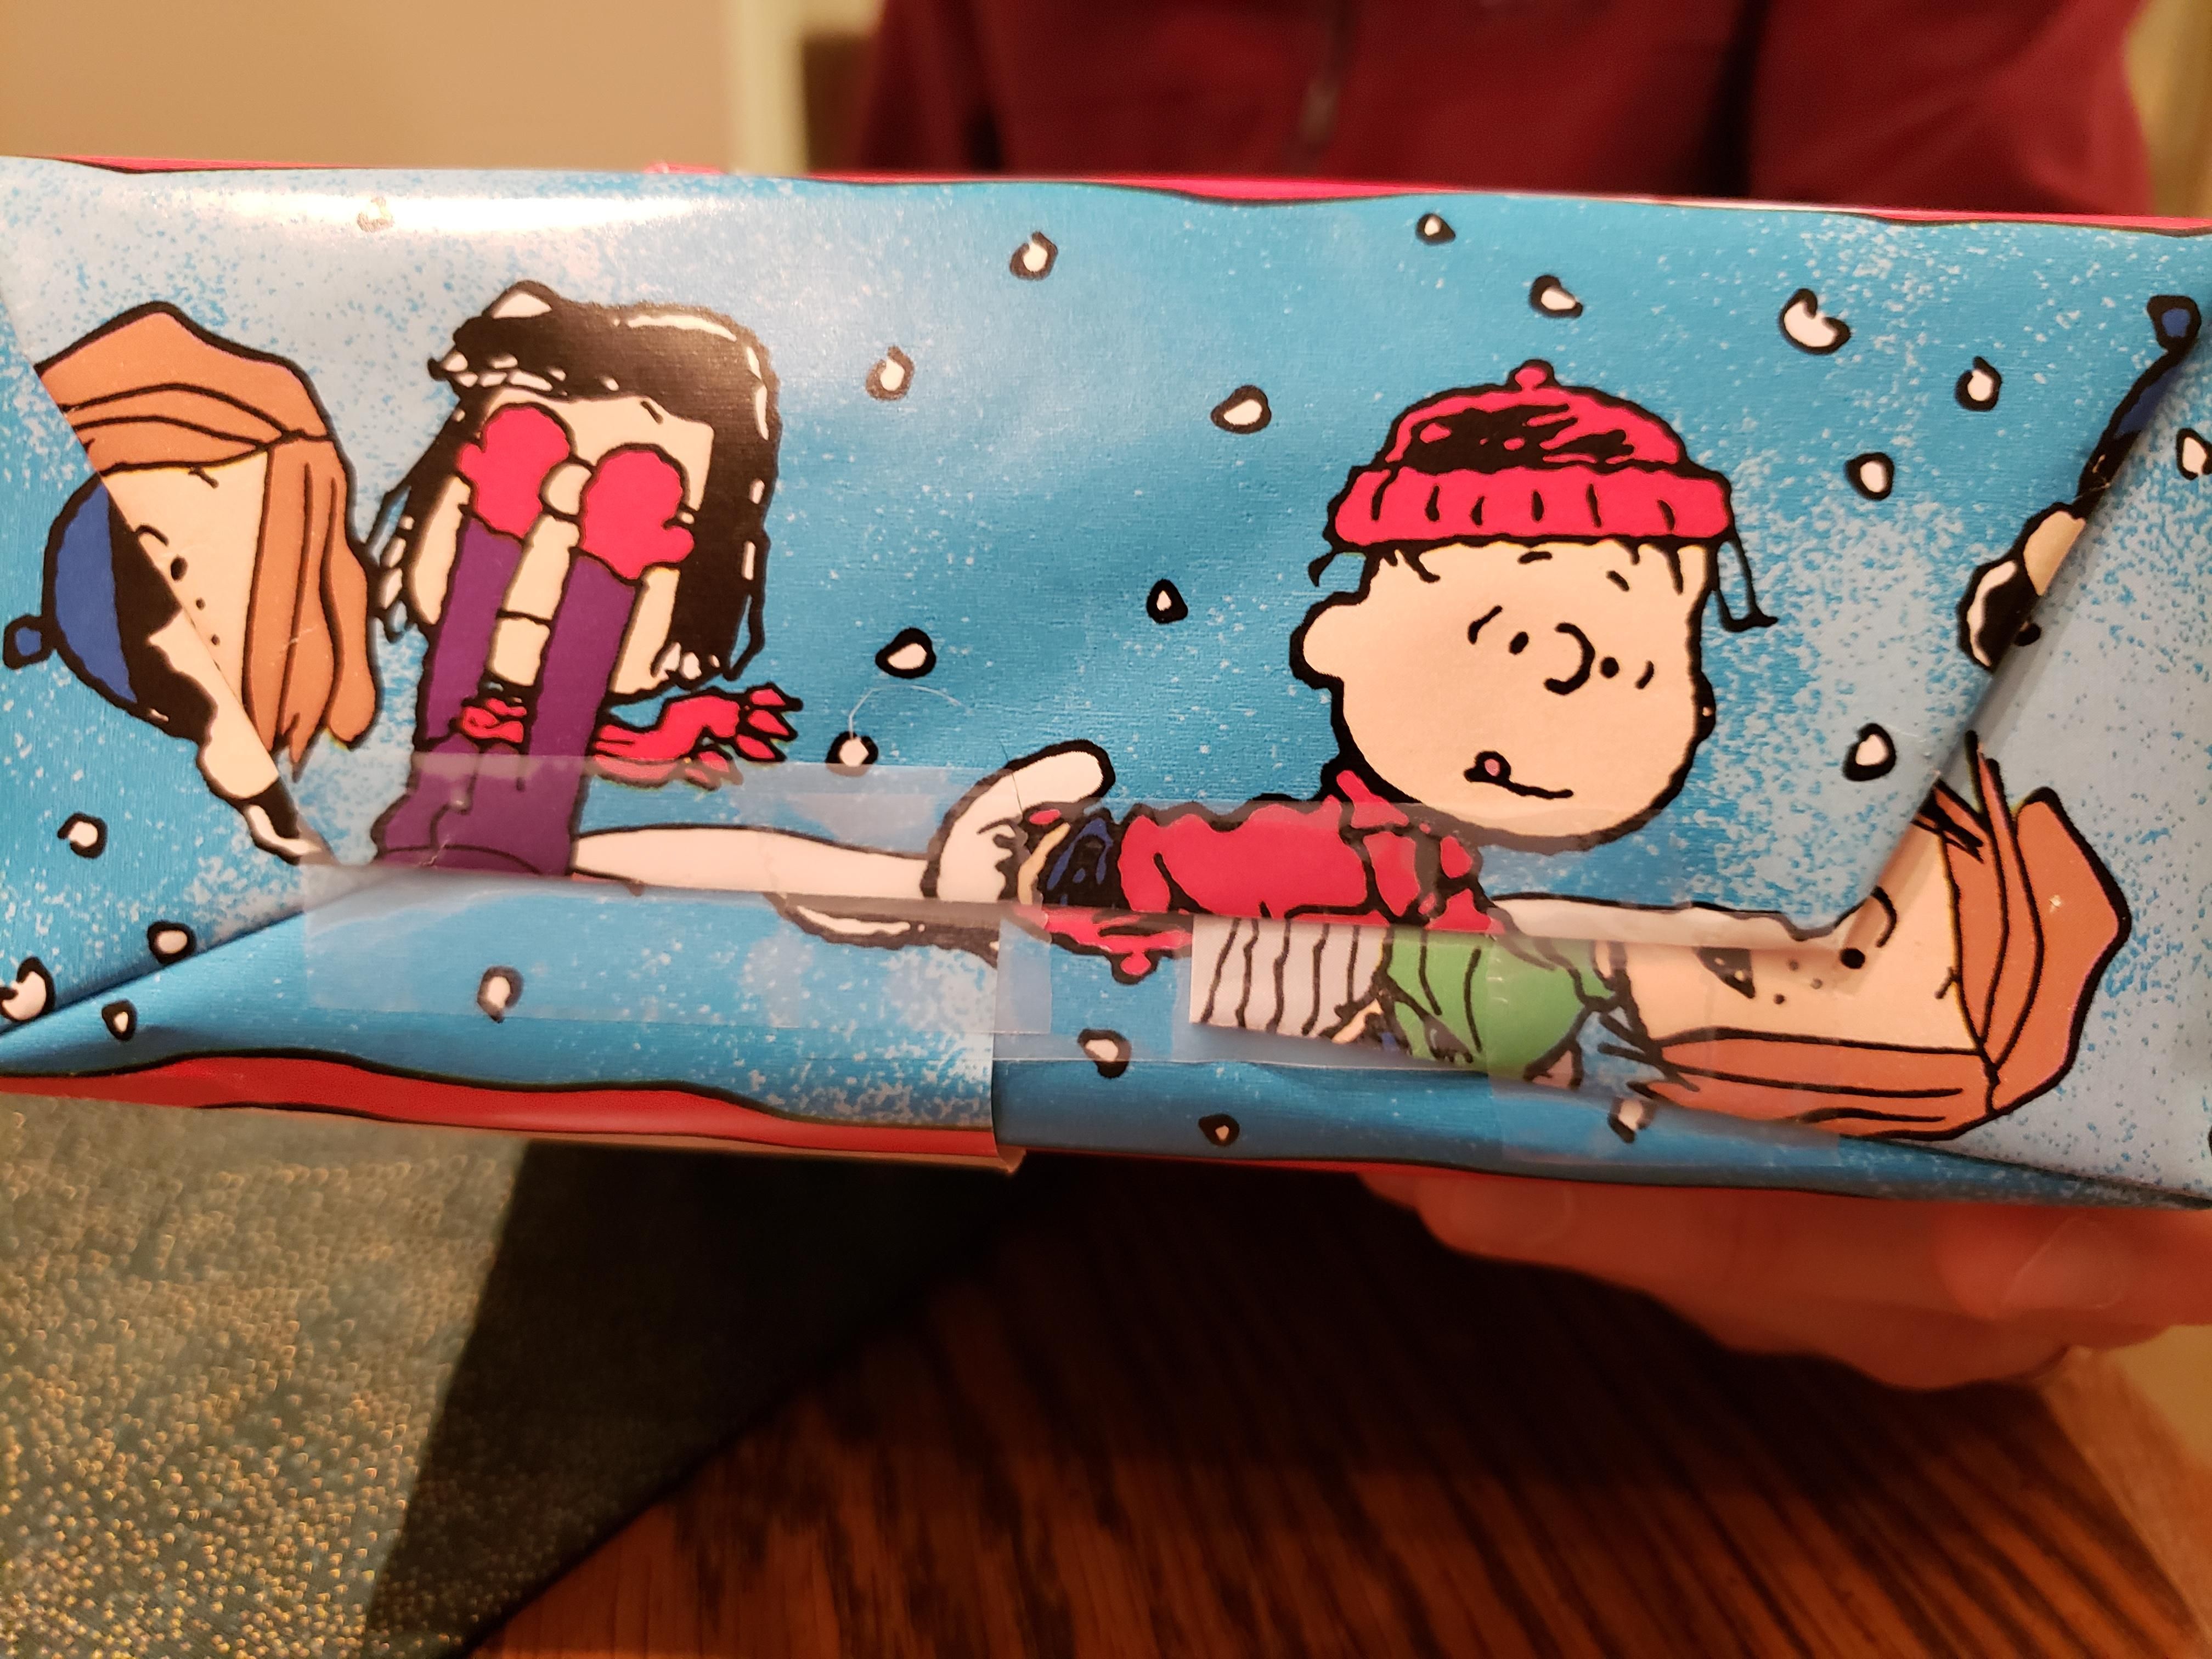 Gift I received...wrapped in a such a way that it appears as if Linus and Patty are getting it on in front of Marcie.